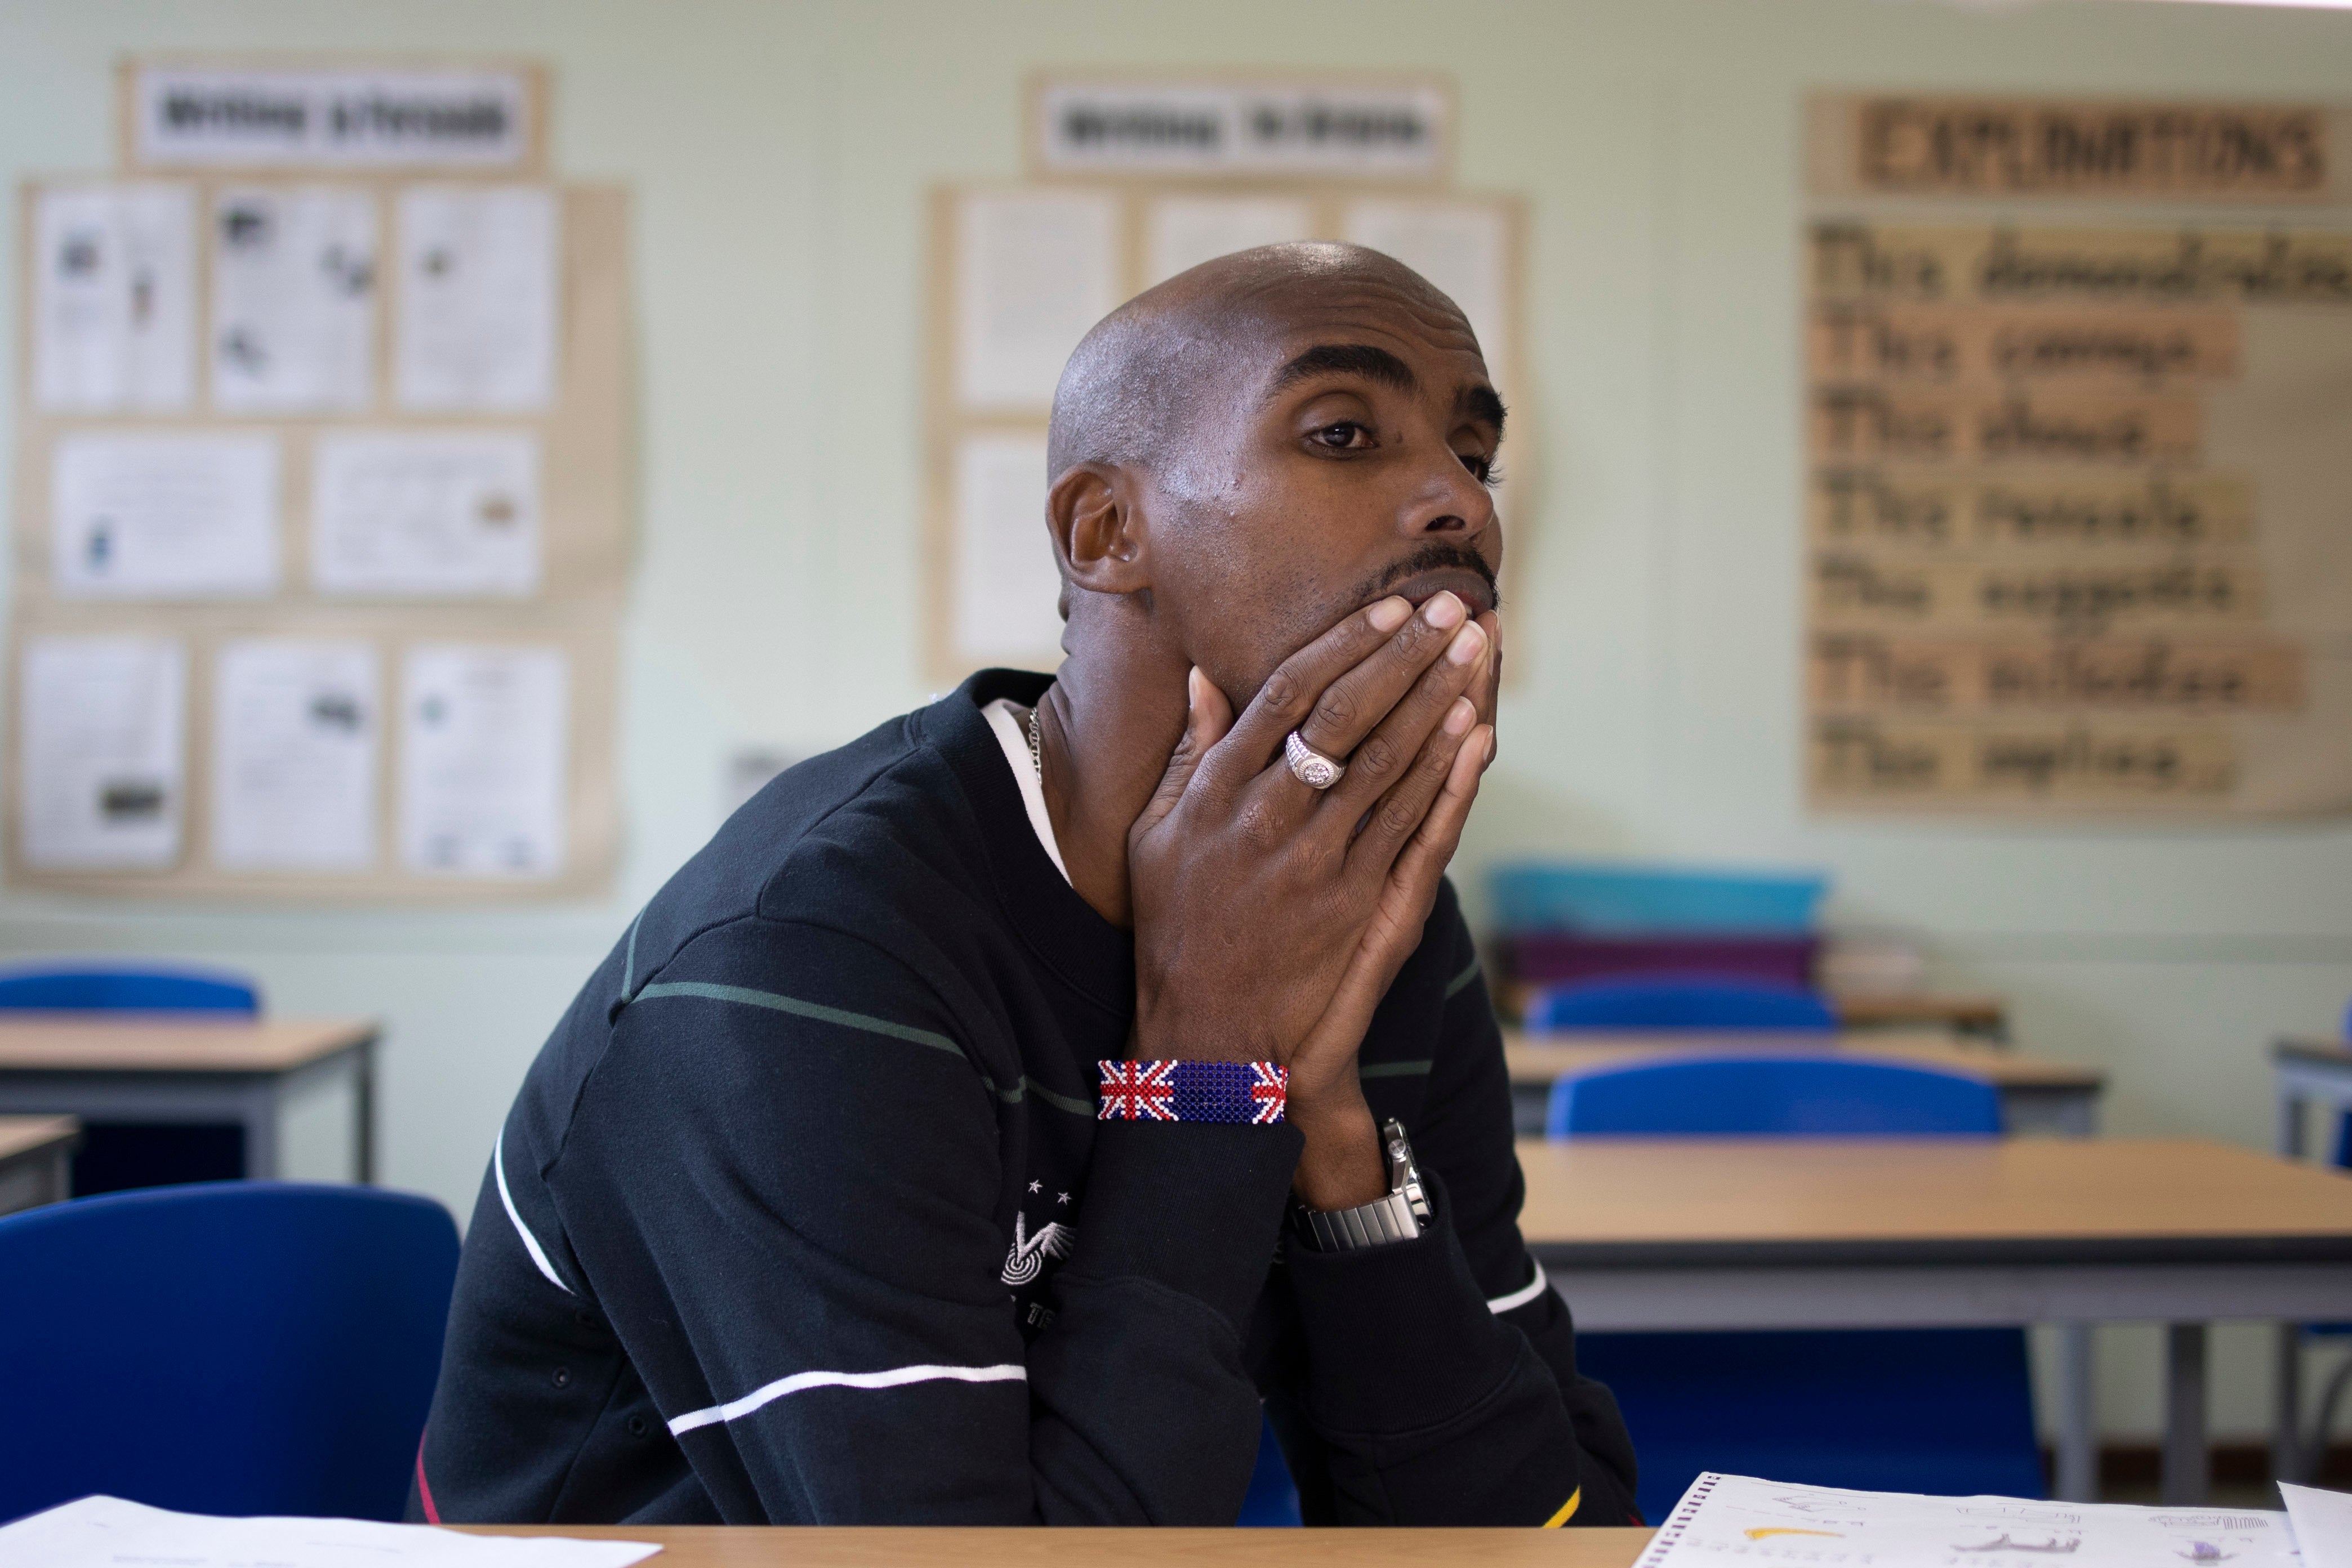 Sir Mo Farah revealed he was brought into the UK illegally under the name of another child